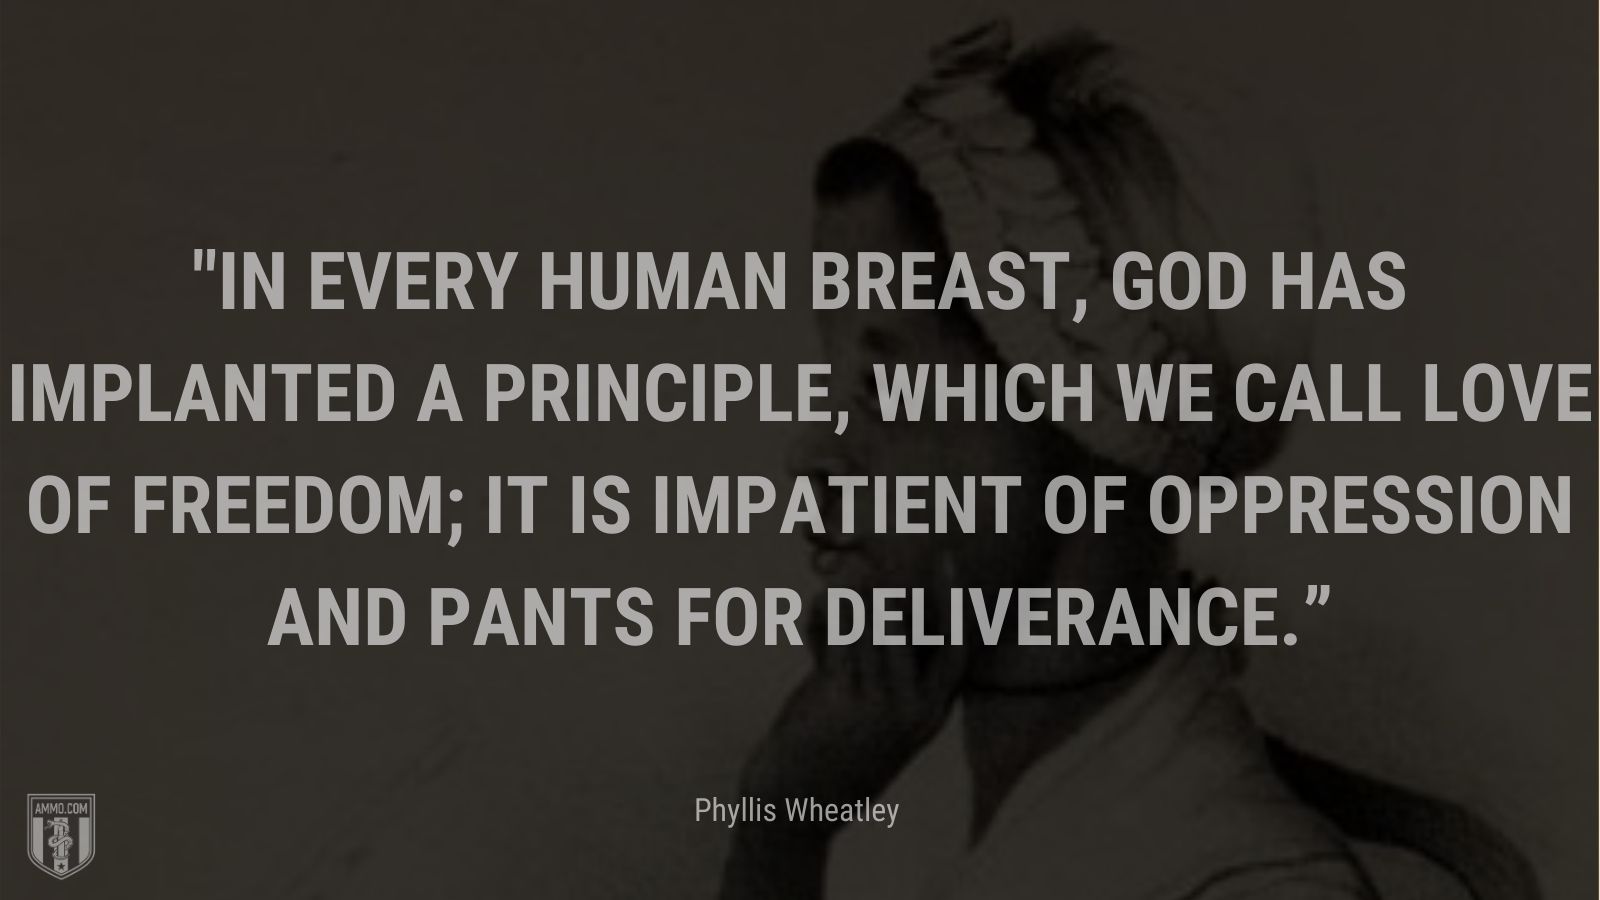 “In every human breast, God has implanted a principle, which we call love of freedom; it is impatient of oppression and pants for deliverance.” - Phyllis Wheatley